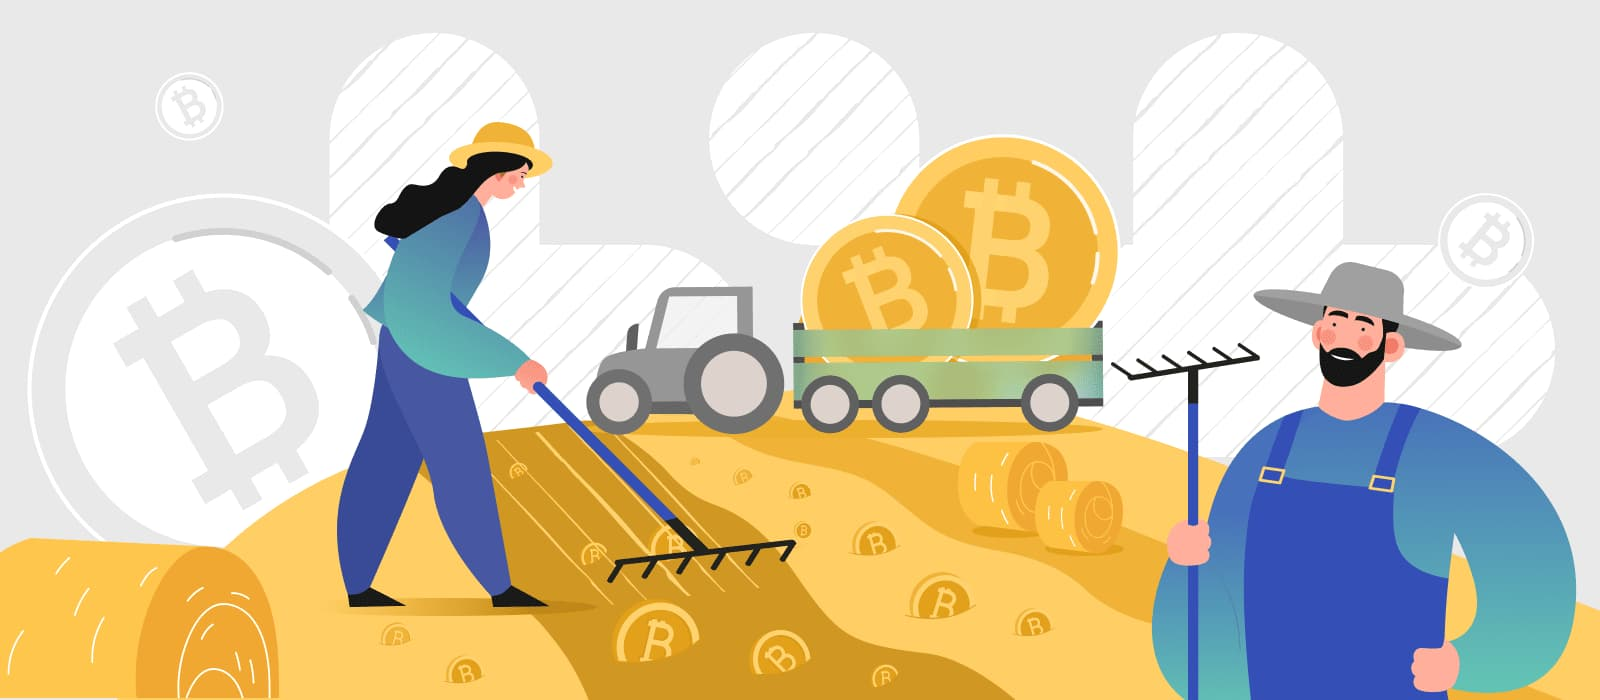 Bitcoin Yield Farming is illustrated with real farmers working their fields.